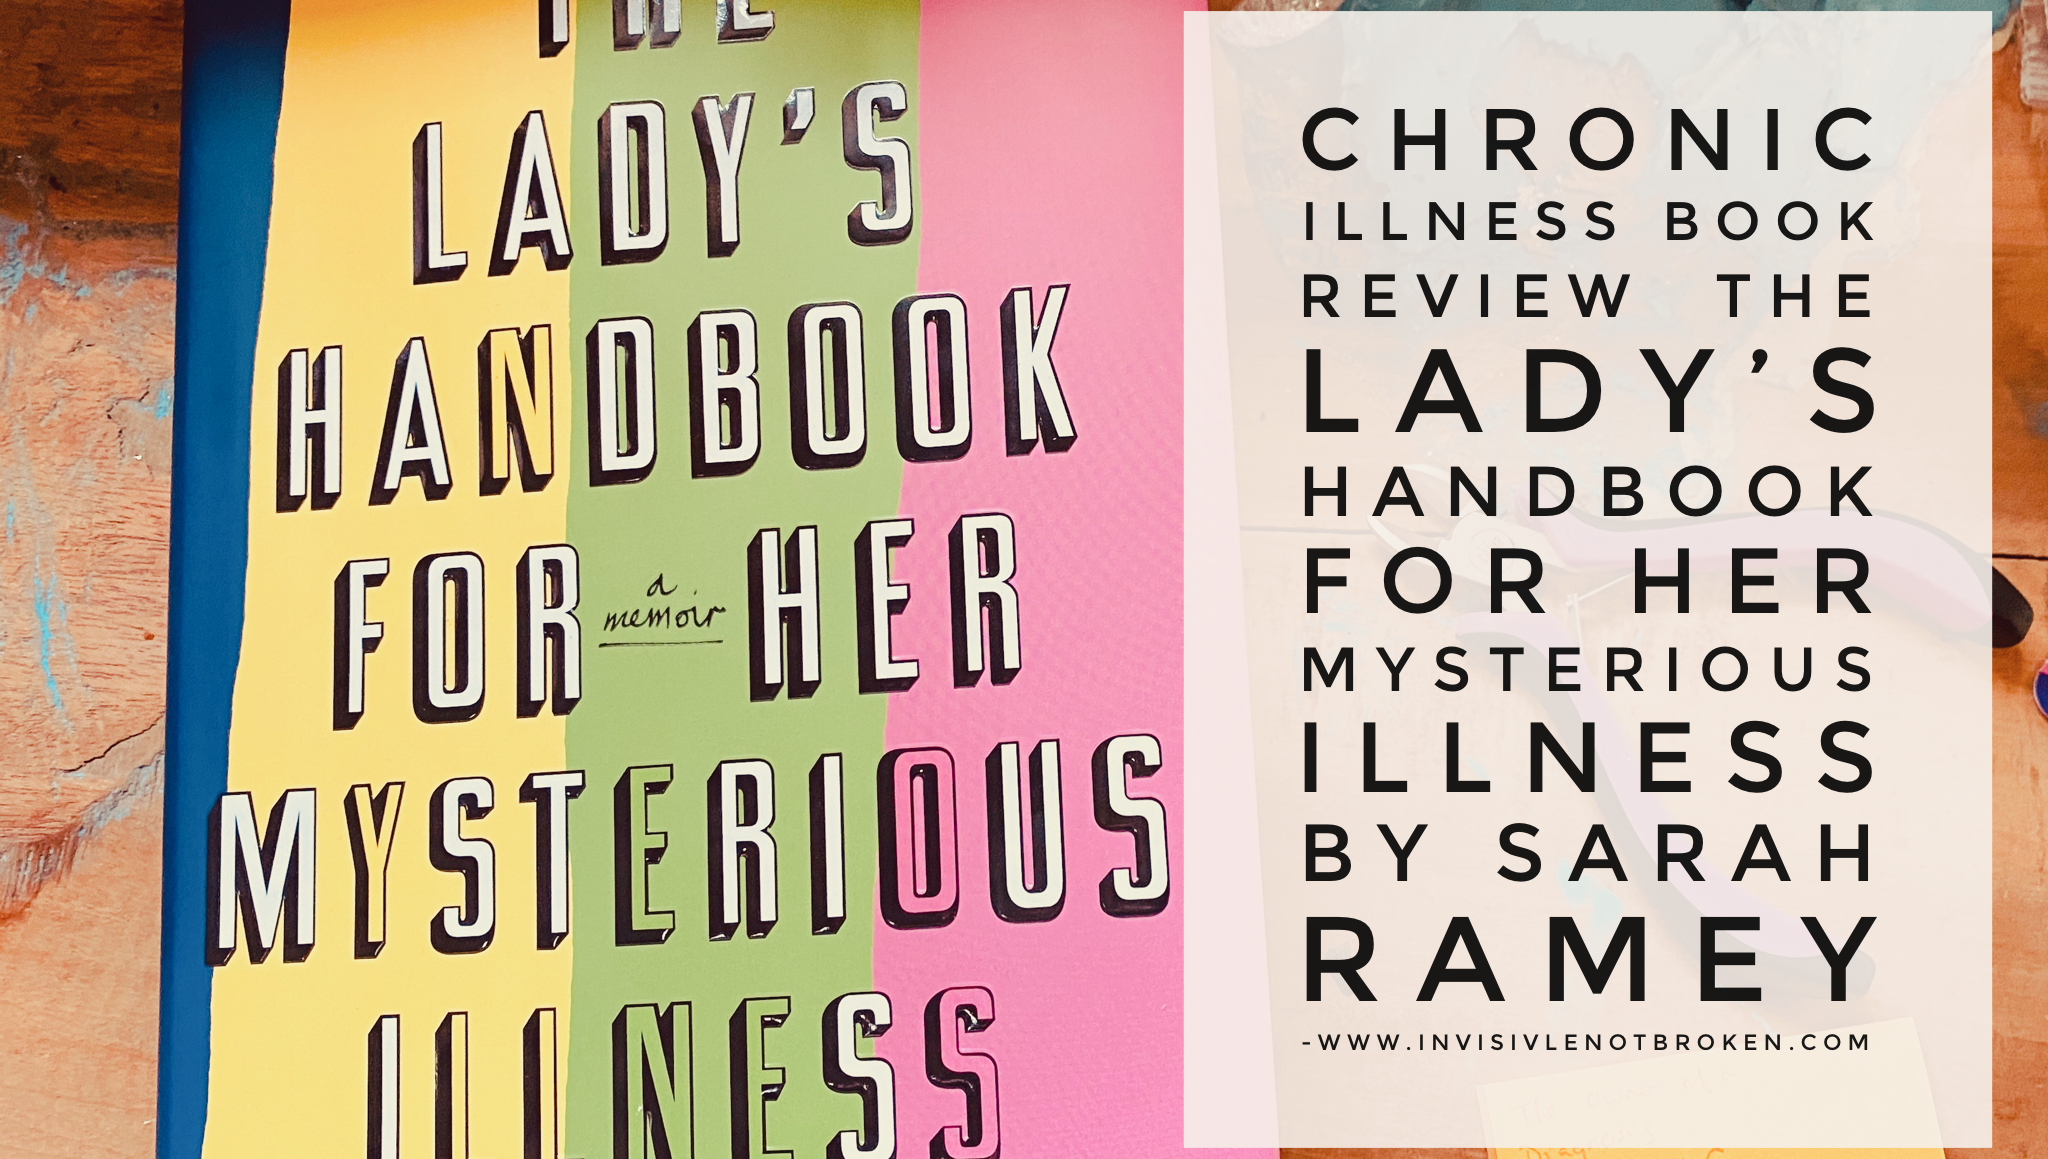 Download The ladys handbook for her mysterious illness Free